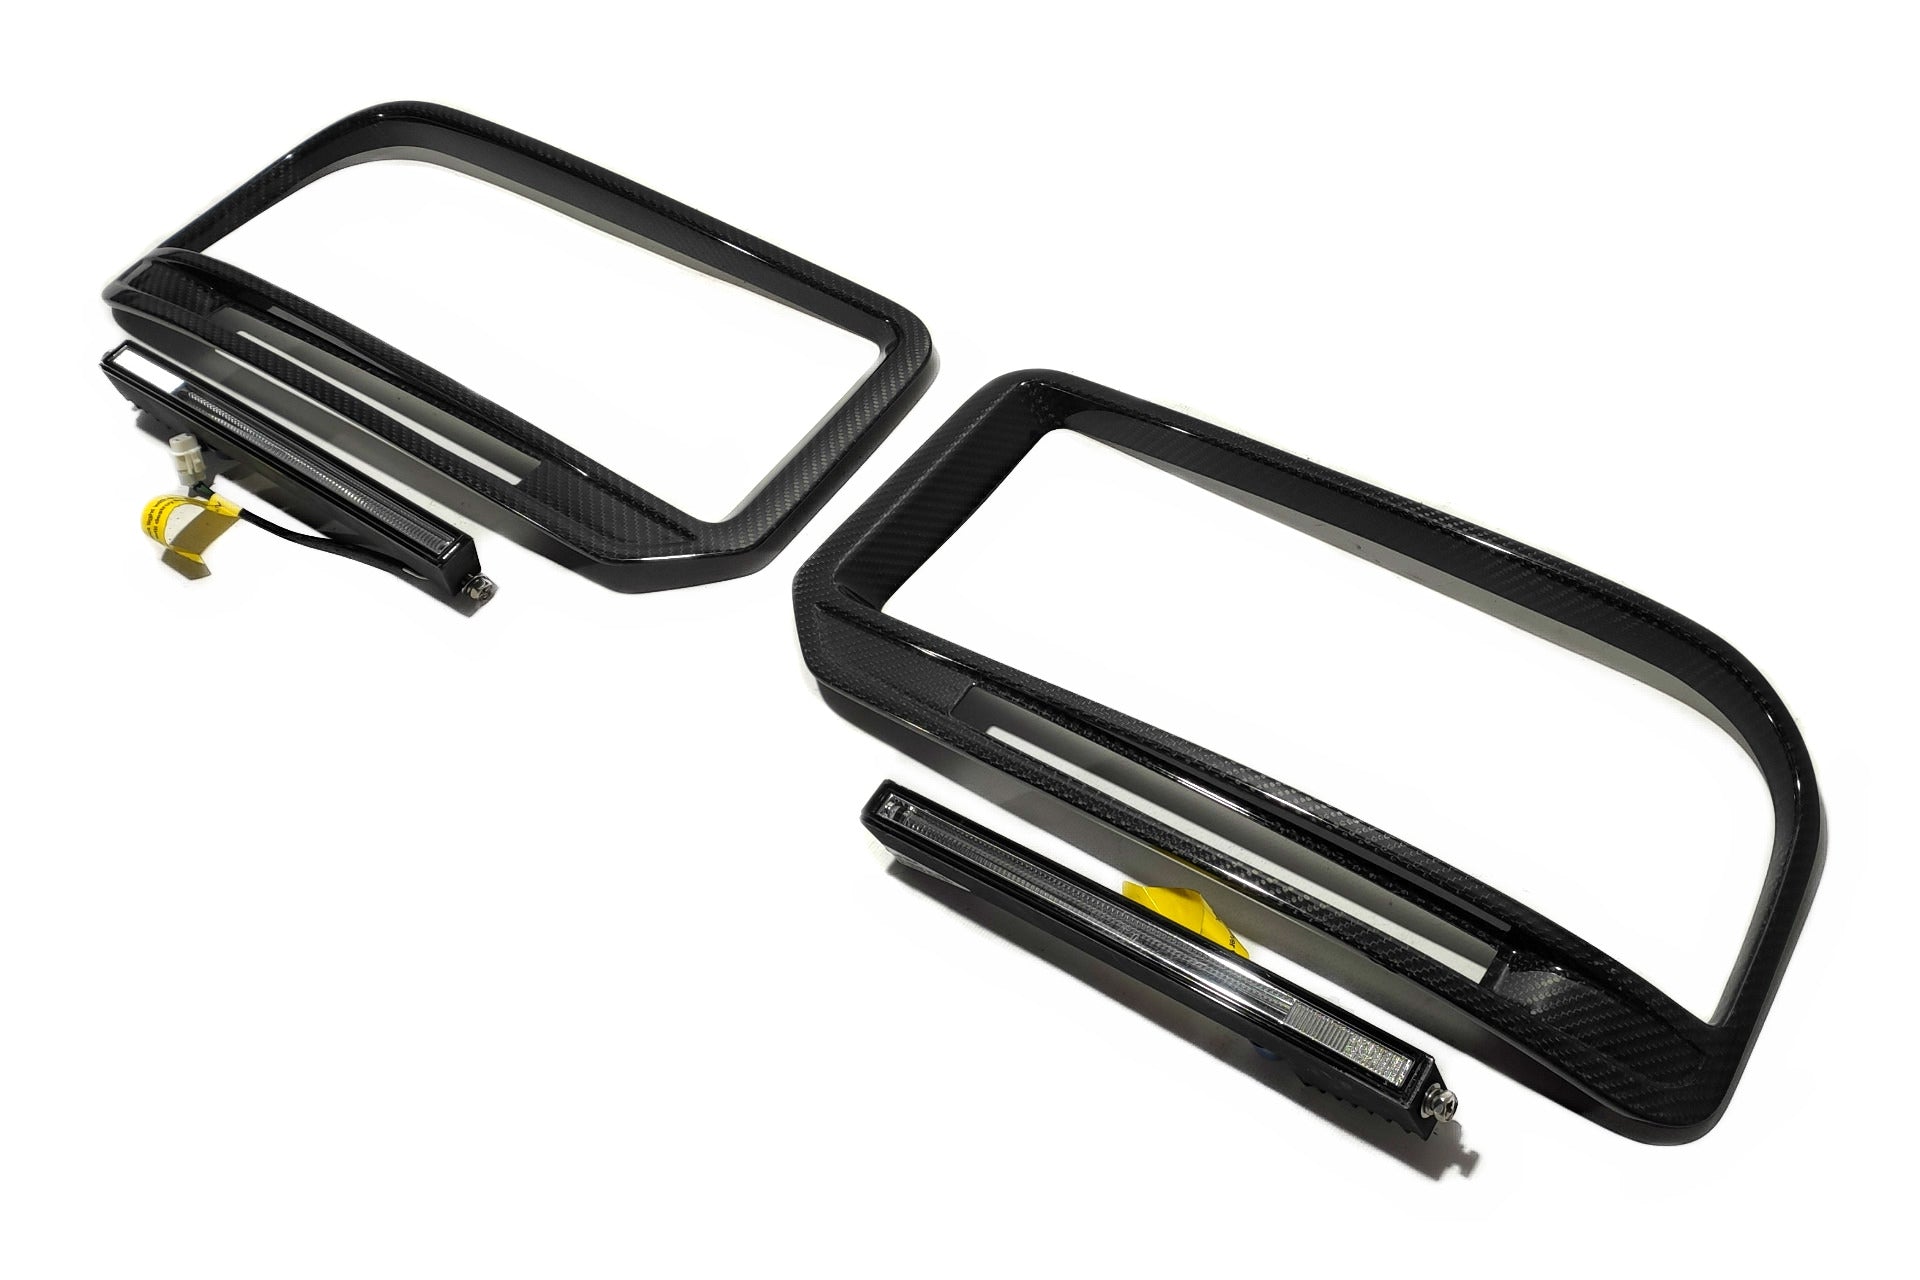 W463a W464 G900 G Wagon carbon fiber front bumper frames insertions with LED lights for Widestar Brabus